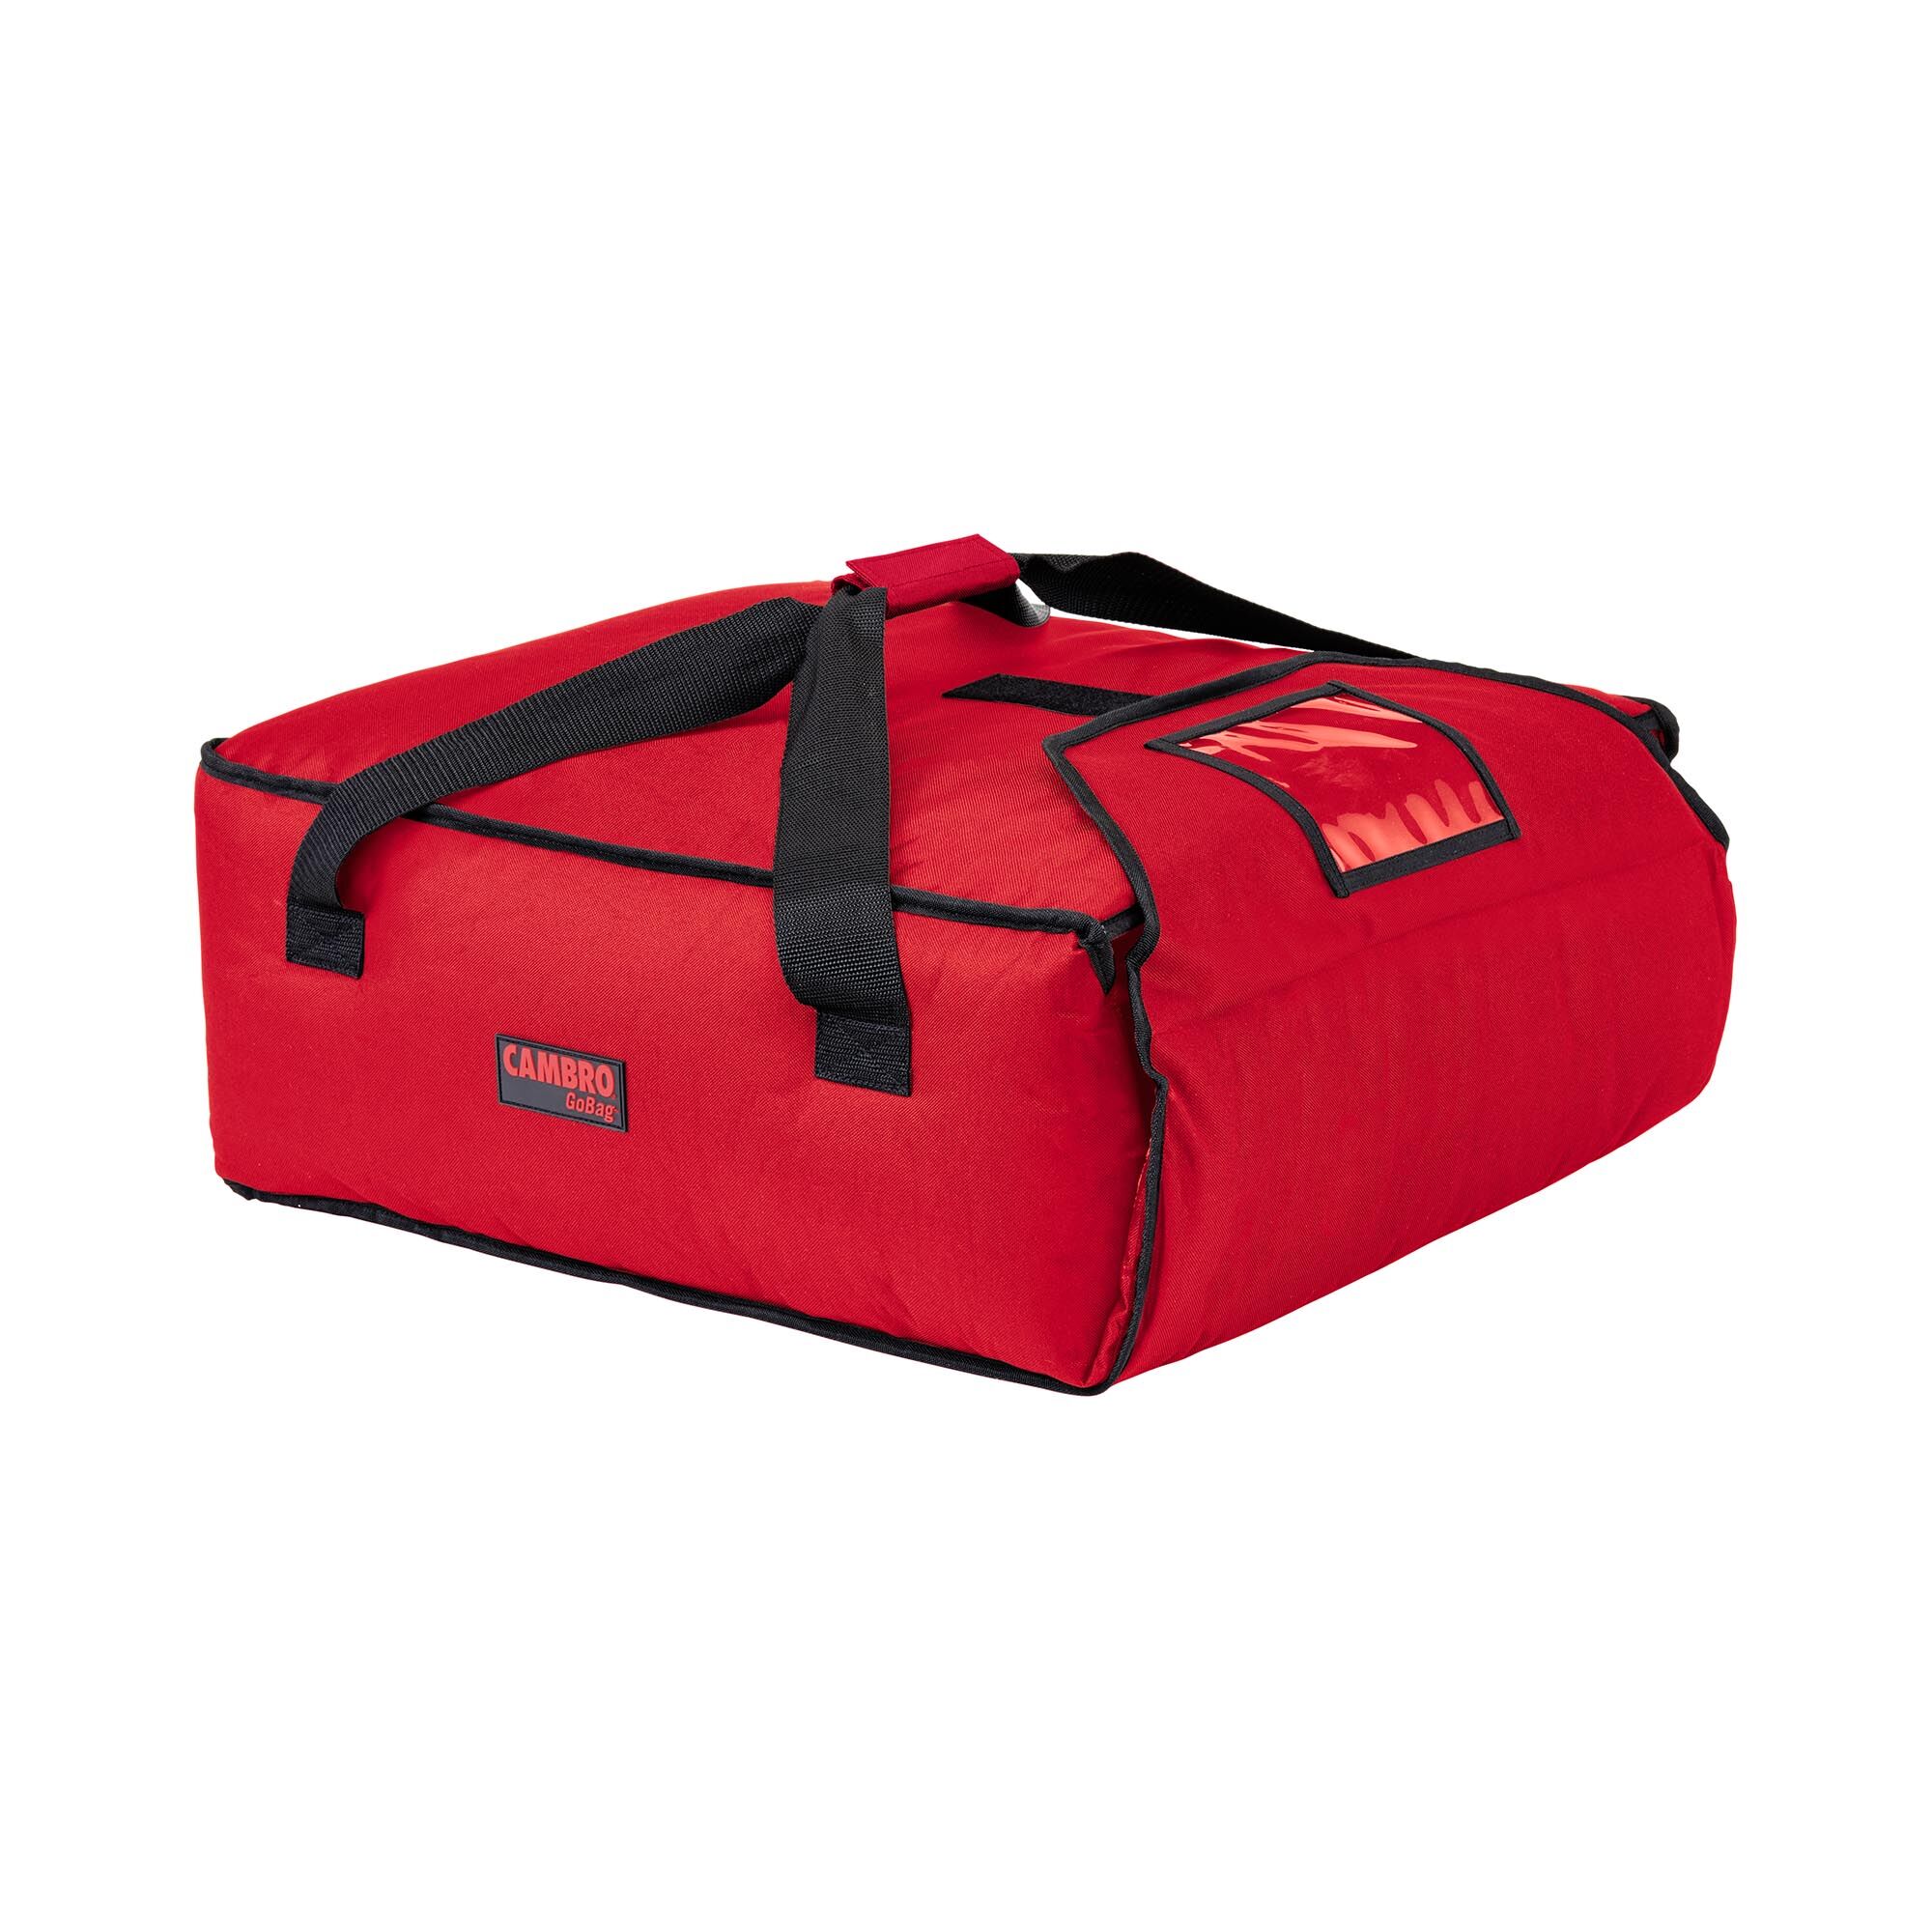 CAMBRO Pizza Delivery Bag - 44.5 x 51 x 19 cm - Red